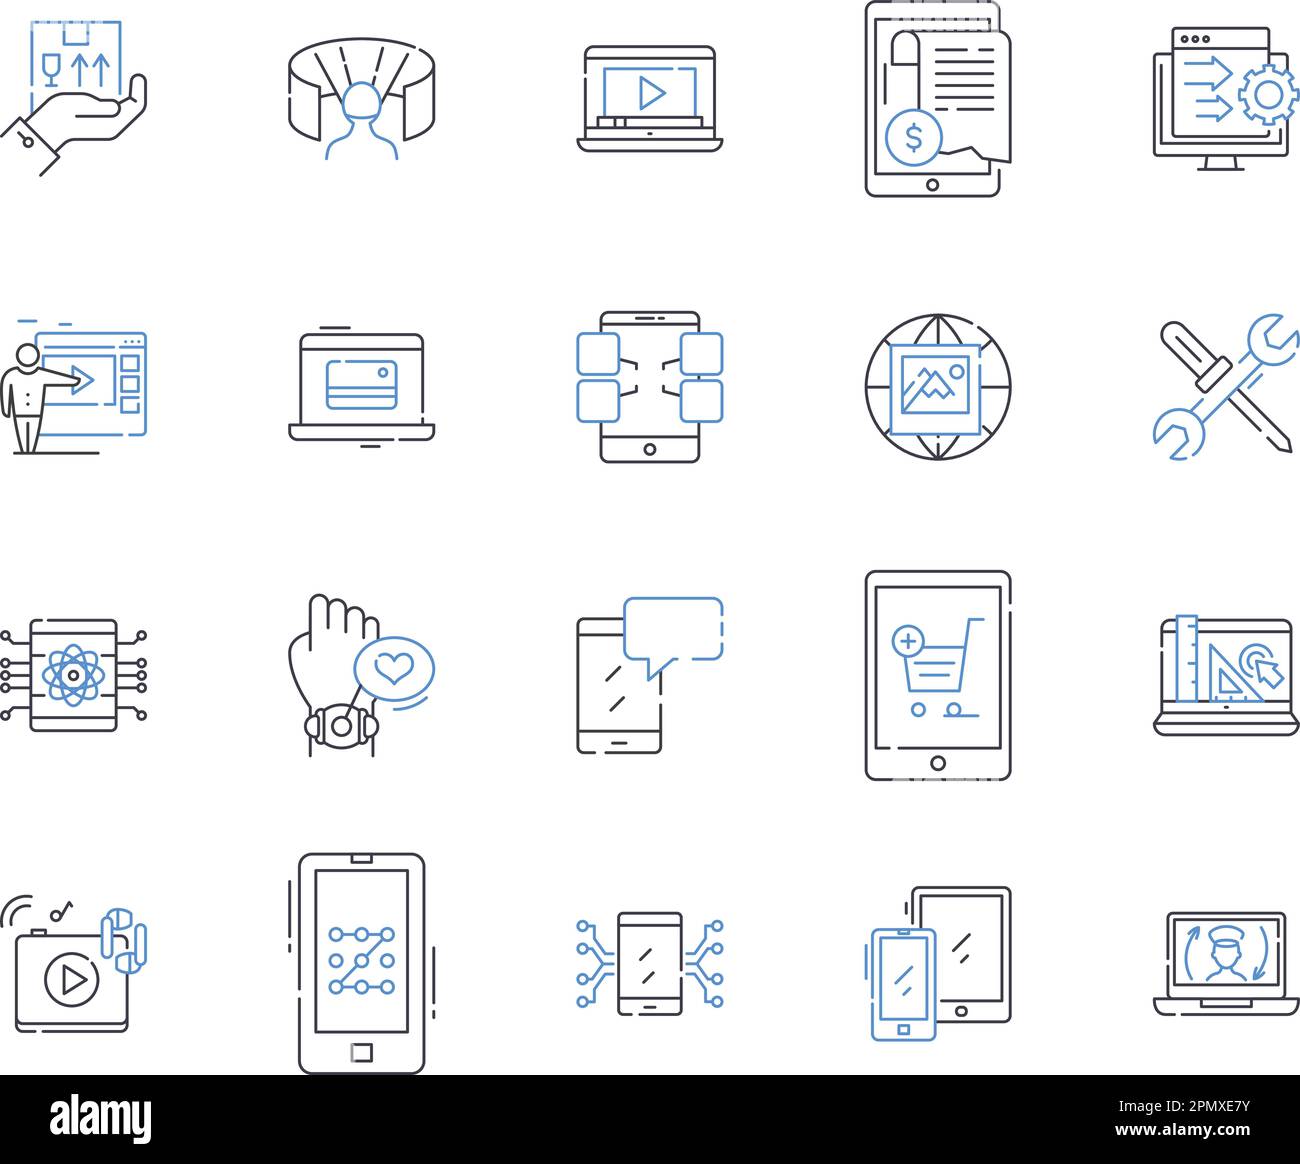 Gadjets and software outline icons collection. Gadgets, Software, Electronics, Technology, Computers, Phones, Tablets vector and illustration concept Stock Vector